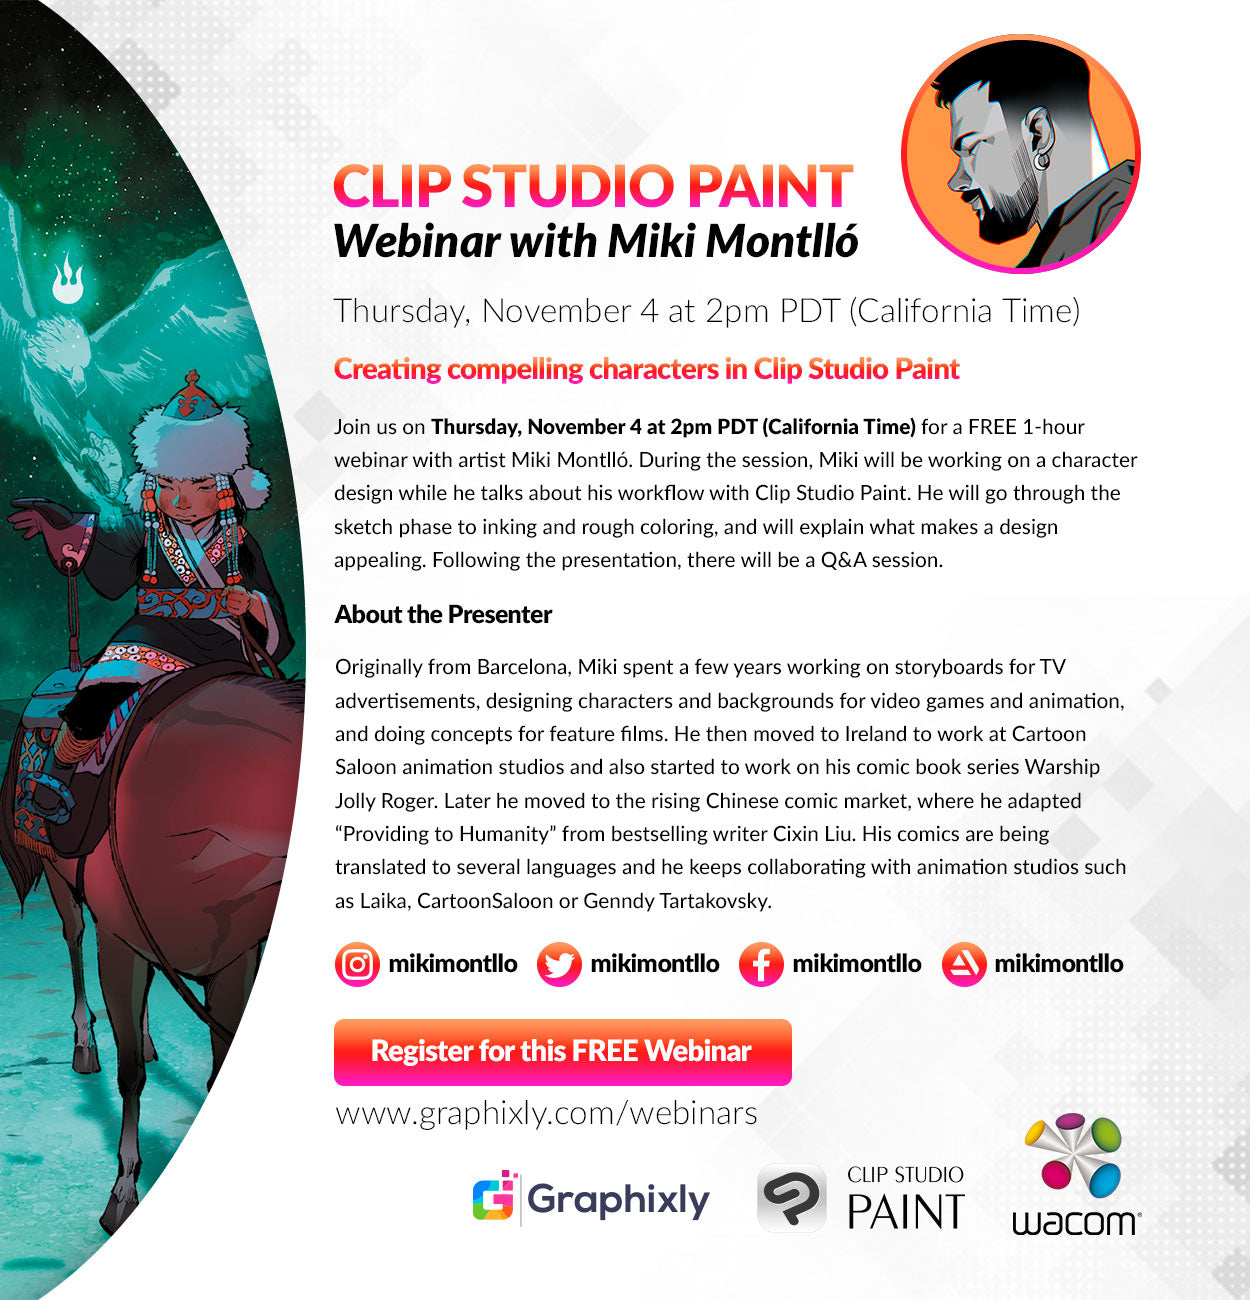 Webinar – Creating compelling characters in Clip Studio Paint with Miki Montlló